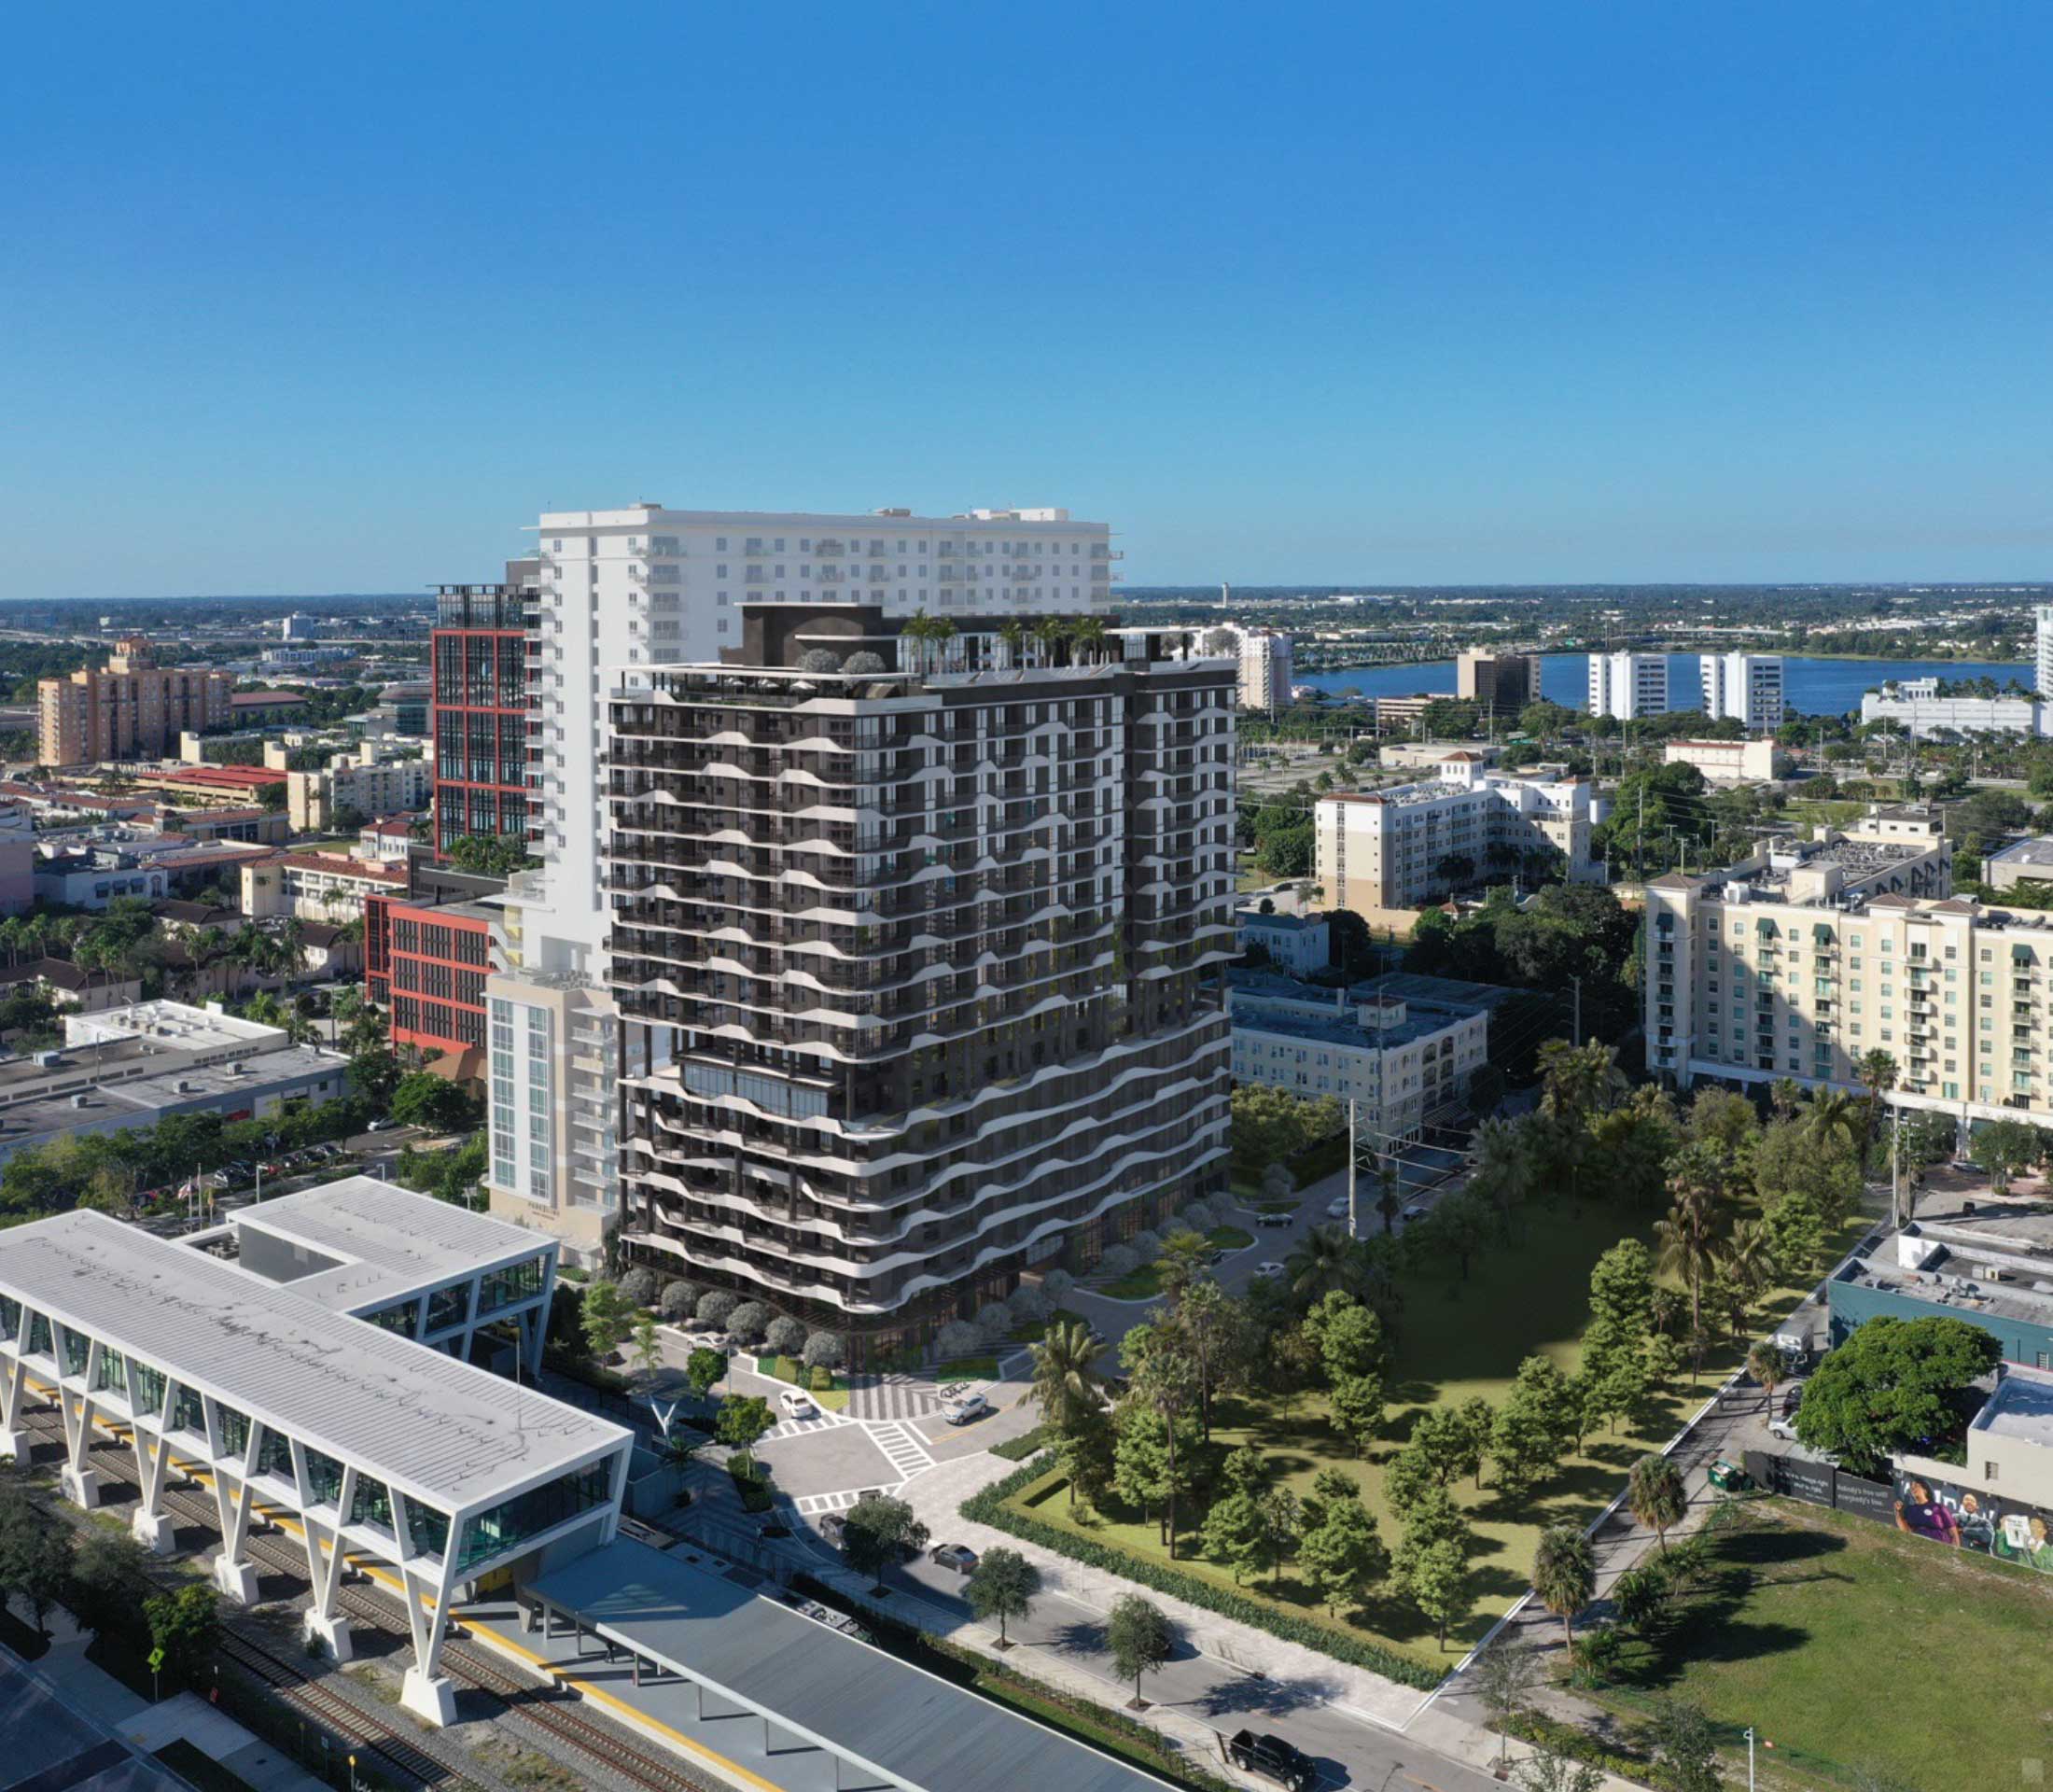 Apartment/hotel tower proposed near Brightline station in West Palm Beach